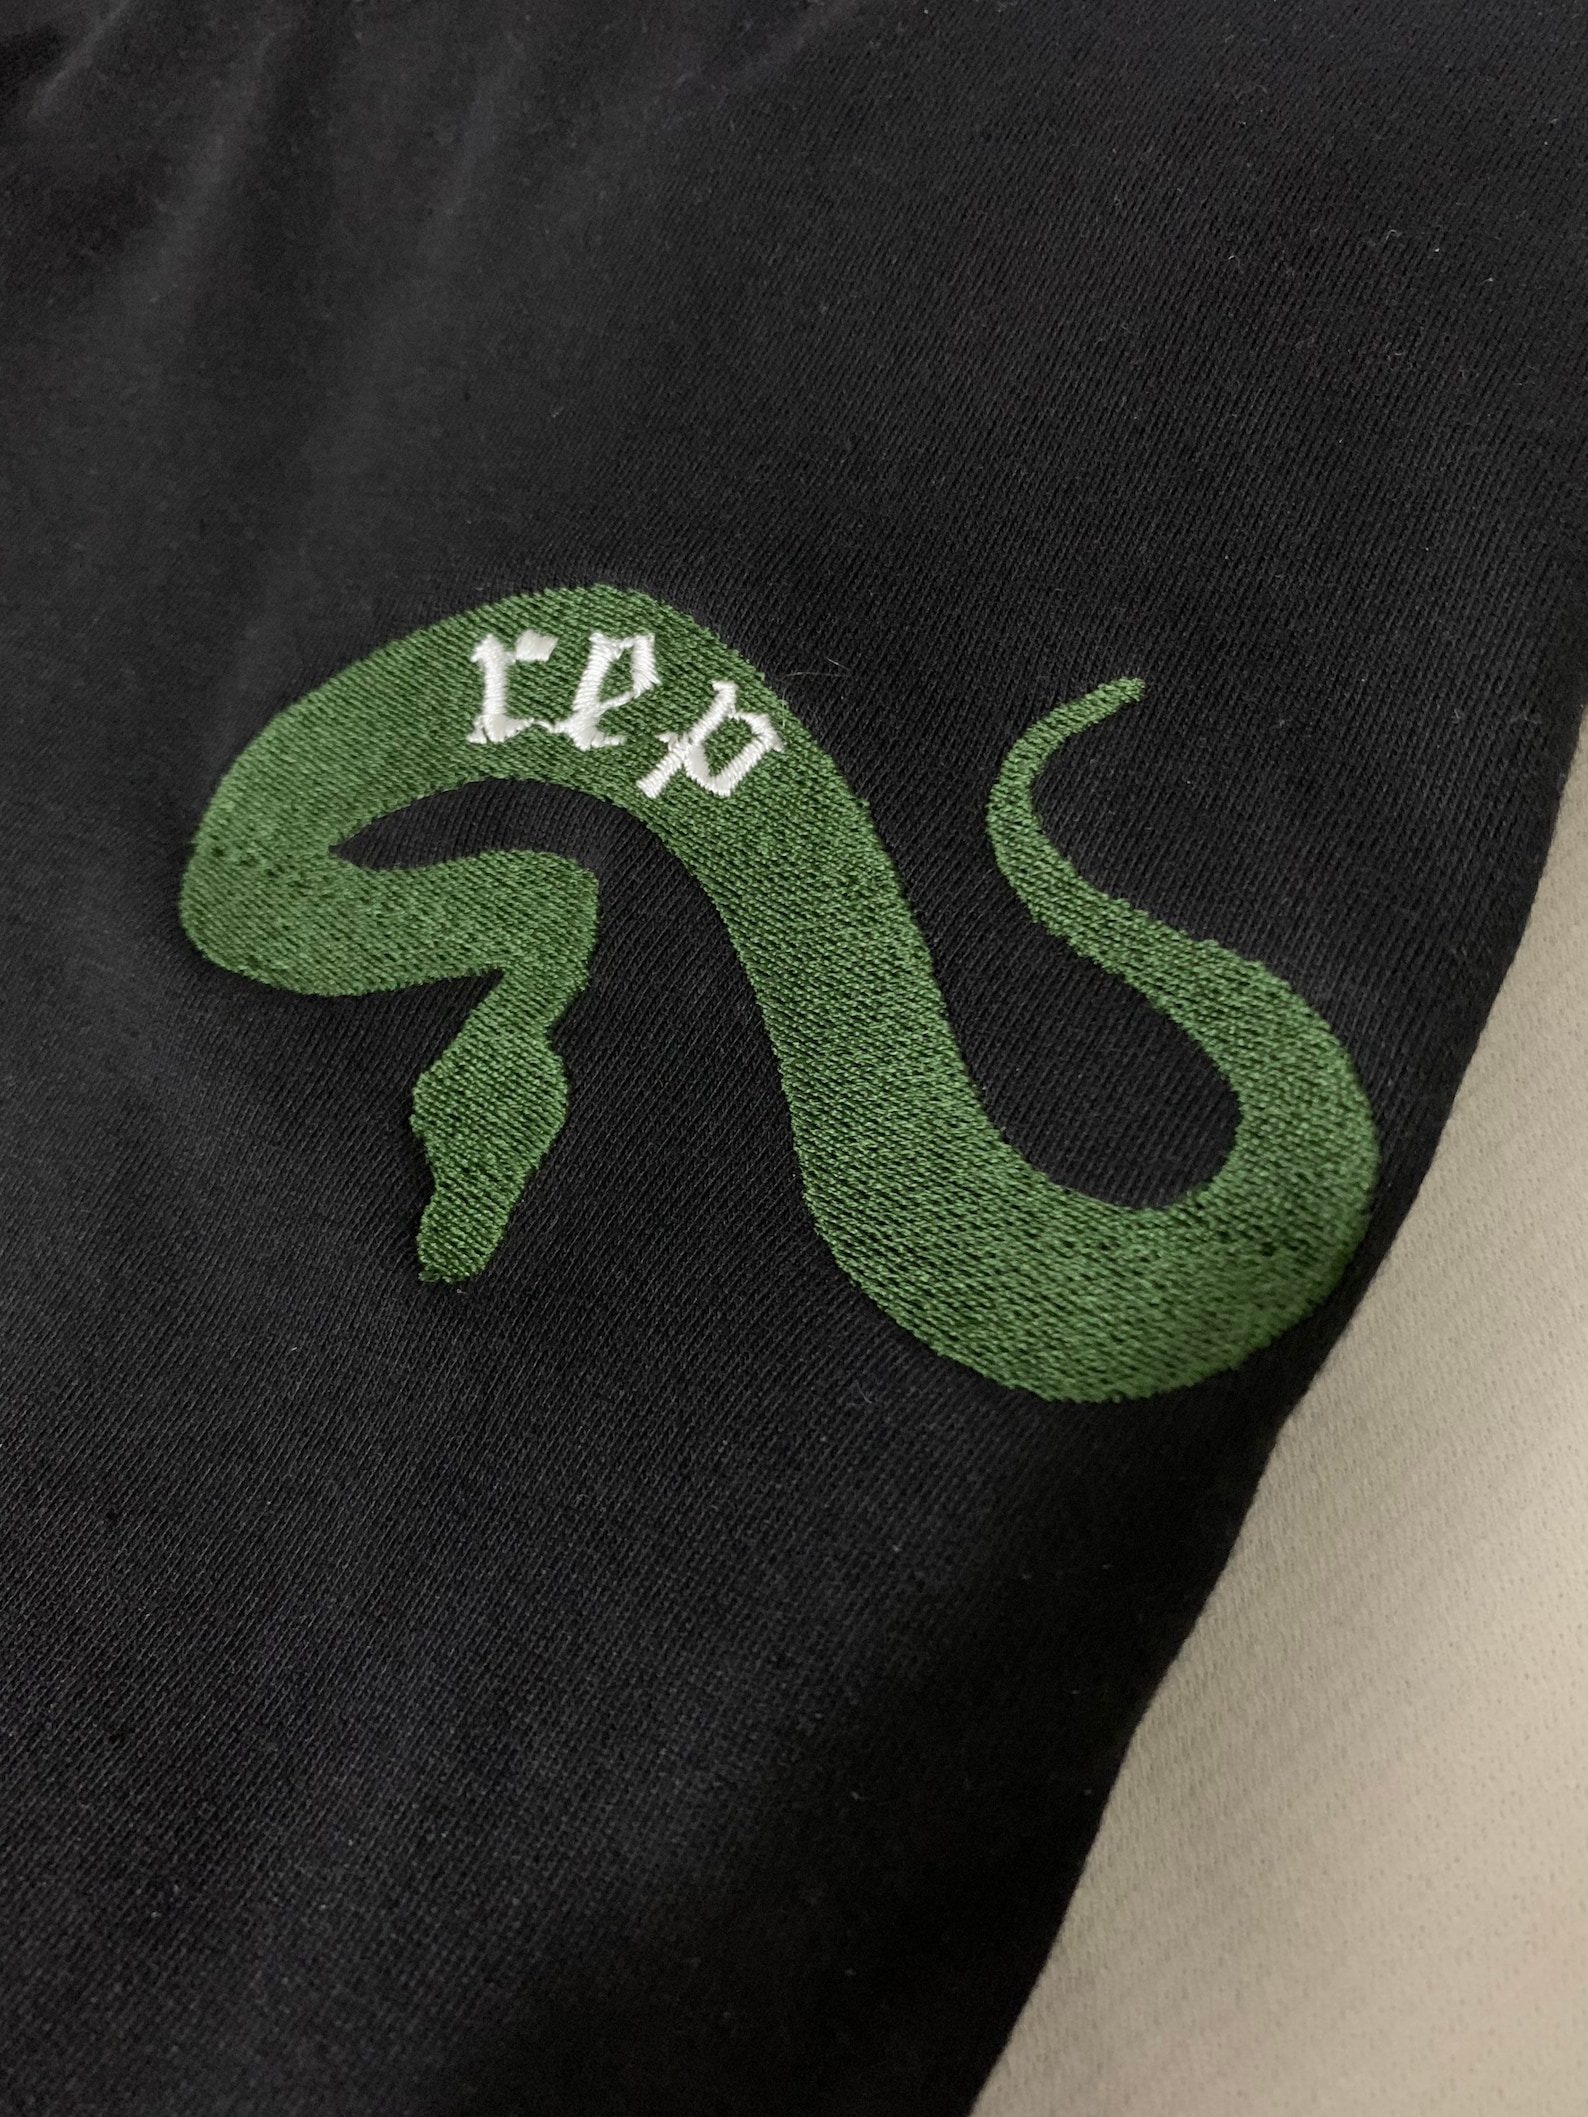 Taylor Swift Reputation Snake embroidered T shirt | Etsy